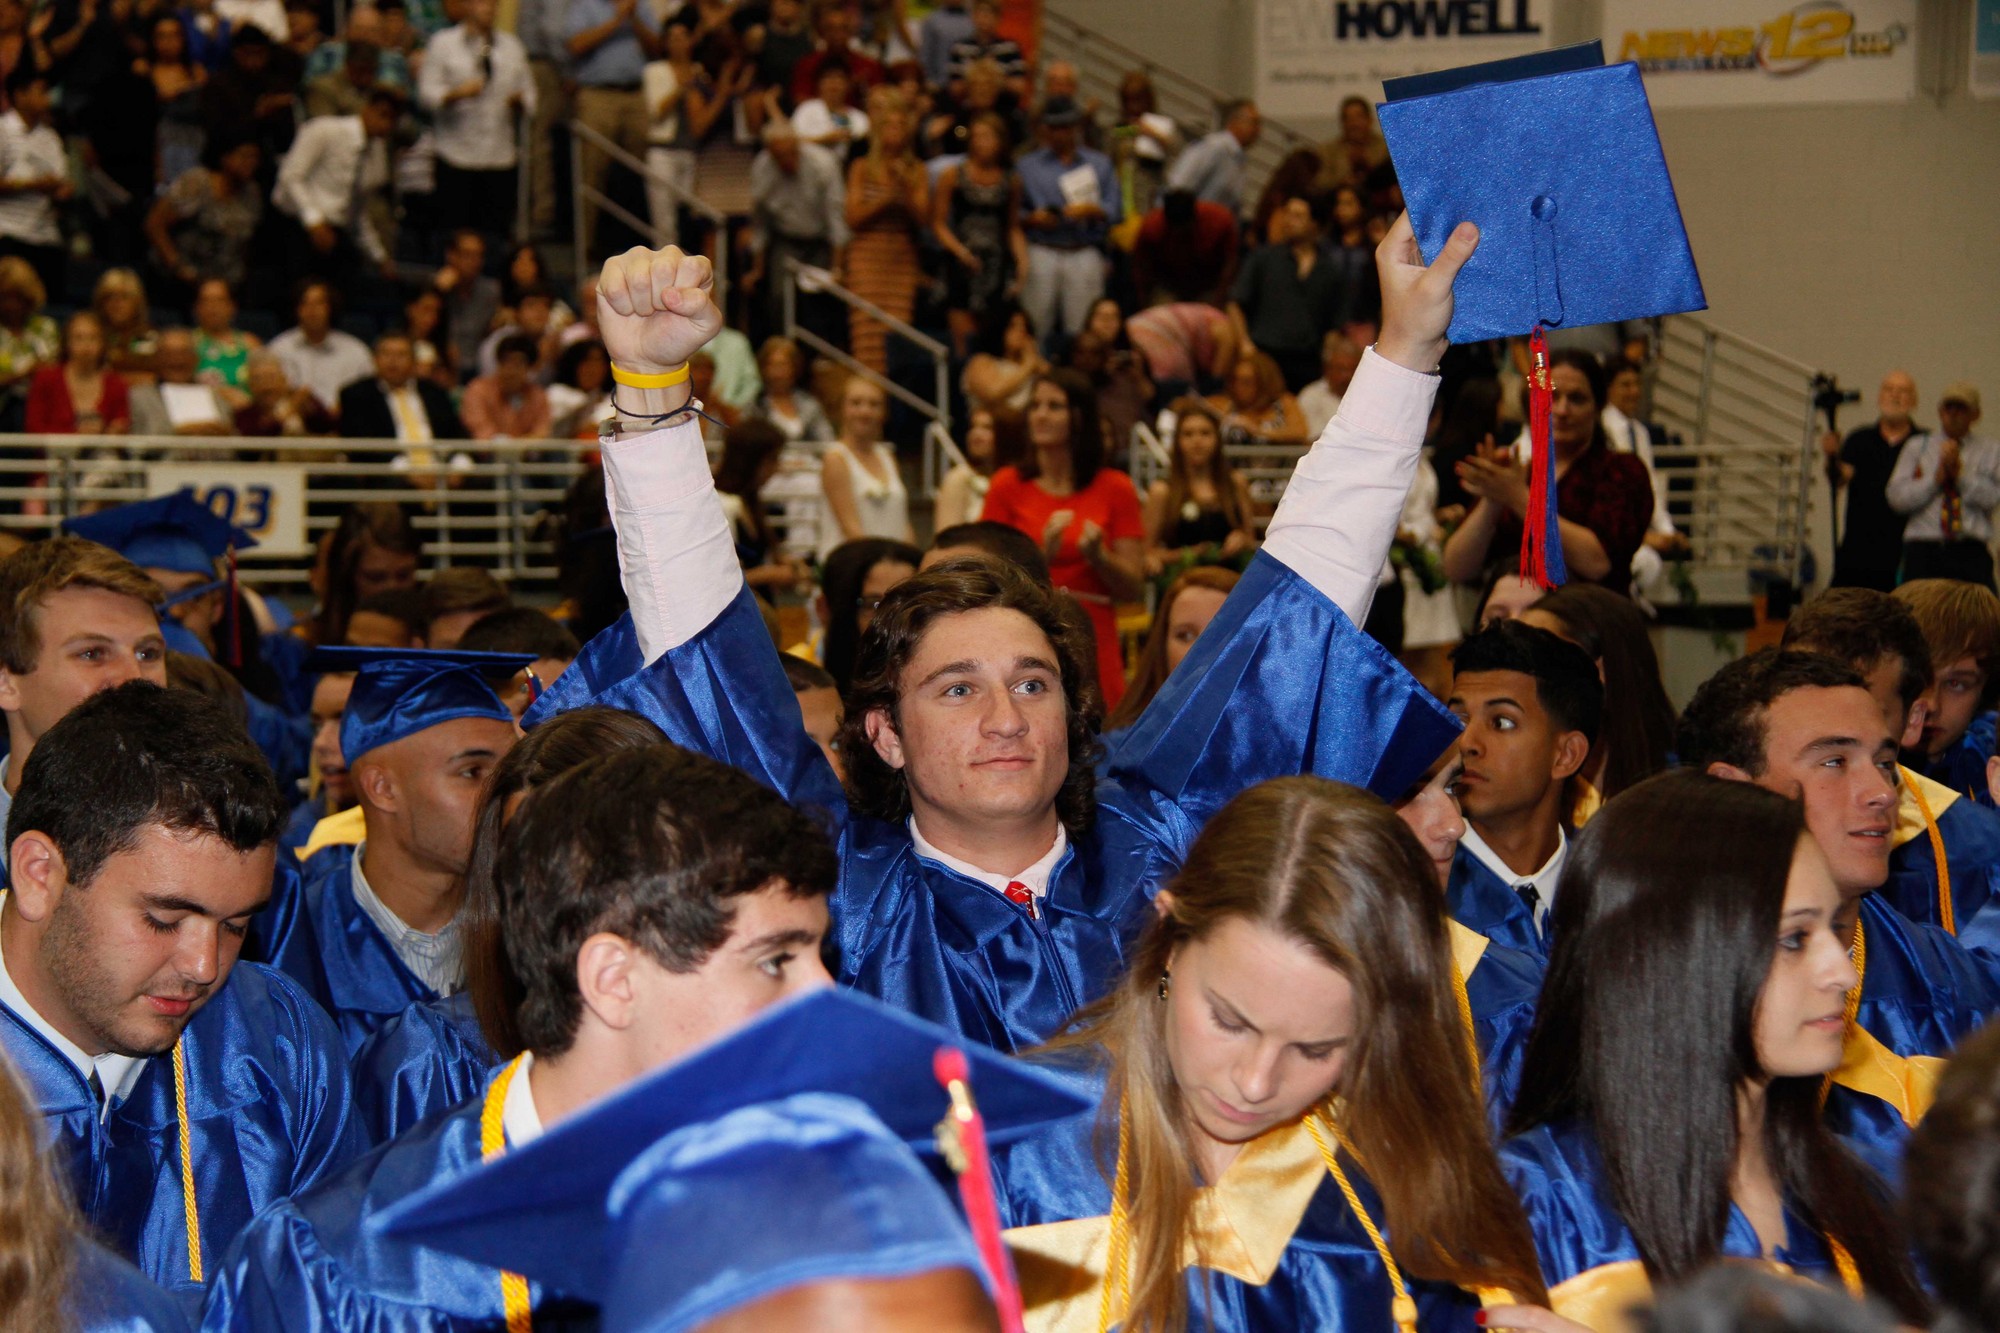 Connor Daly celebrated his graduation from South Side High School.